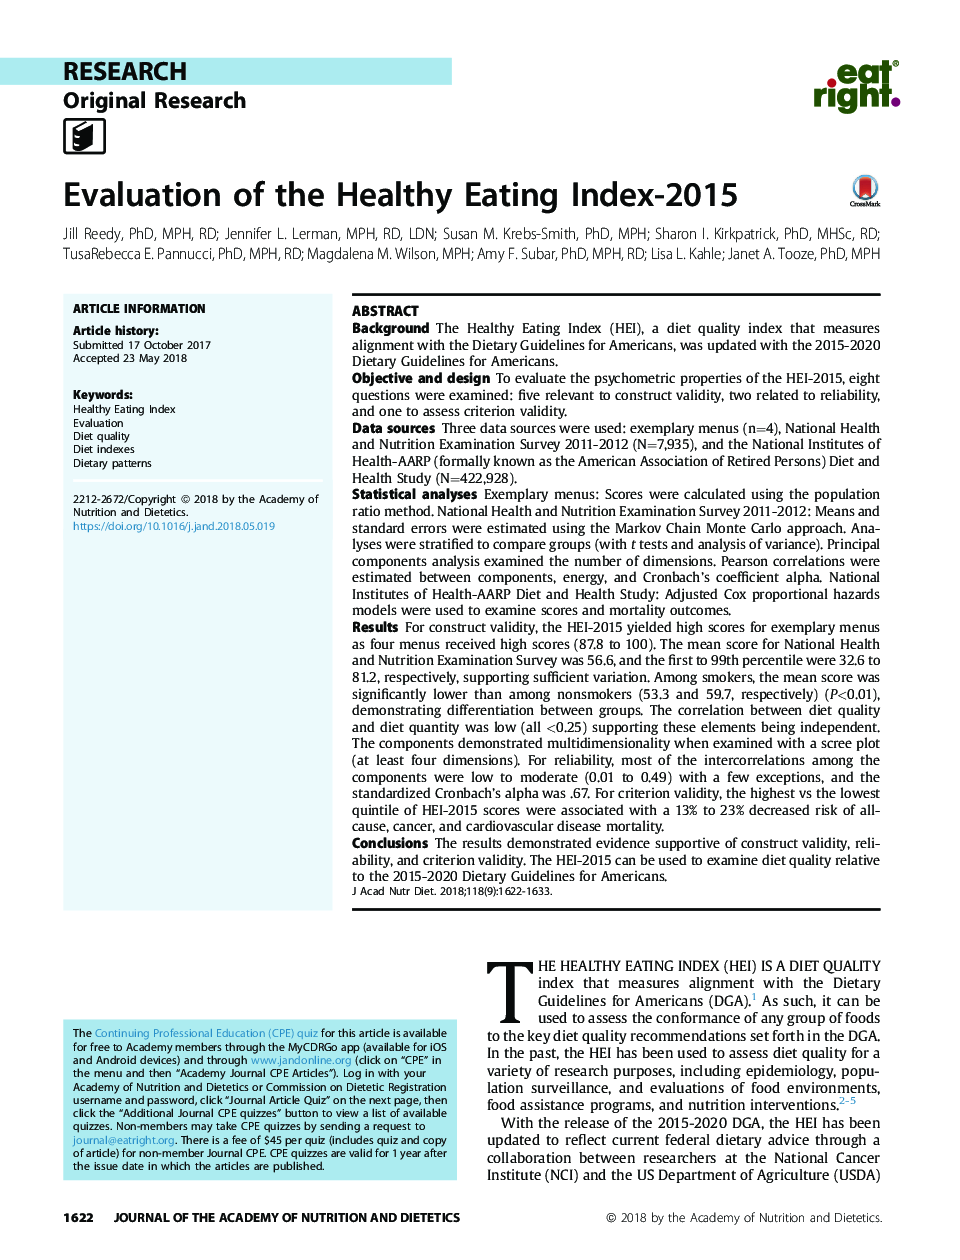 Evaluation of the Healthy Eating Index-2015